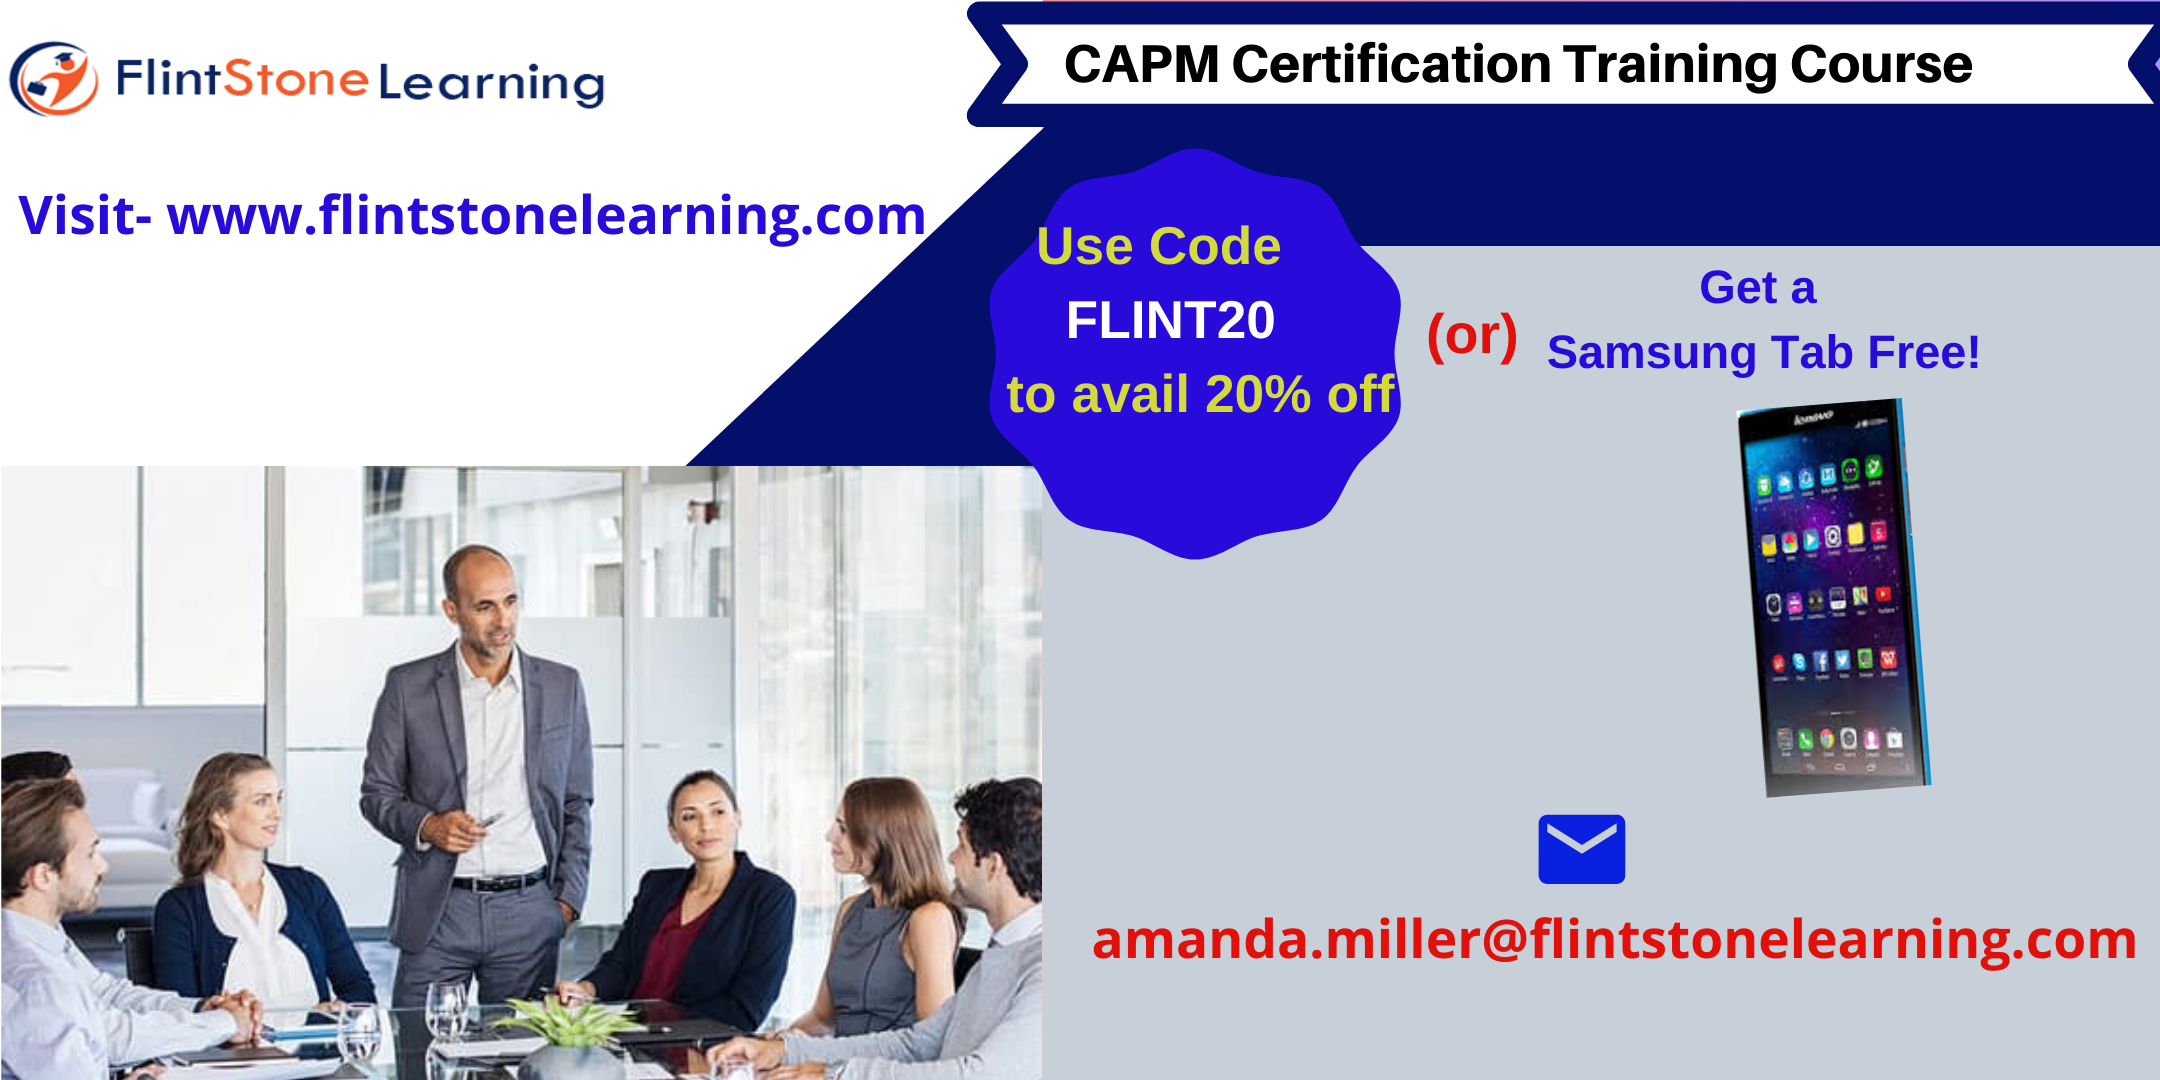 CAPM Certification Training Course in Waterbury, CT